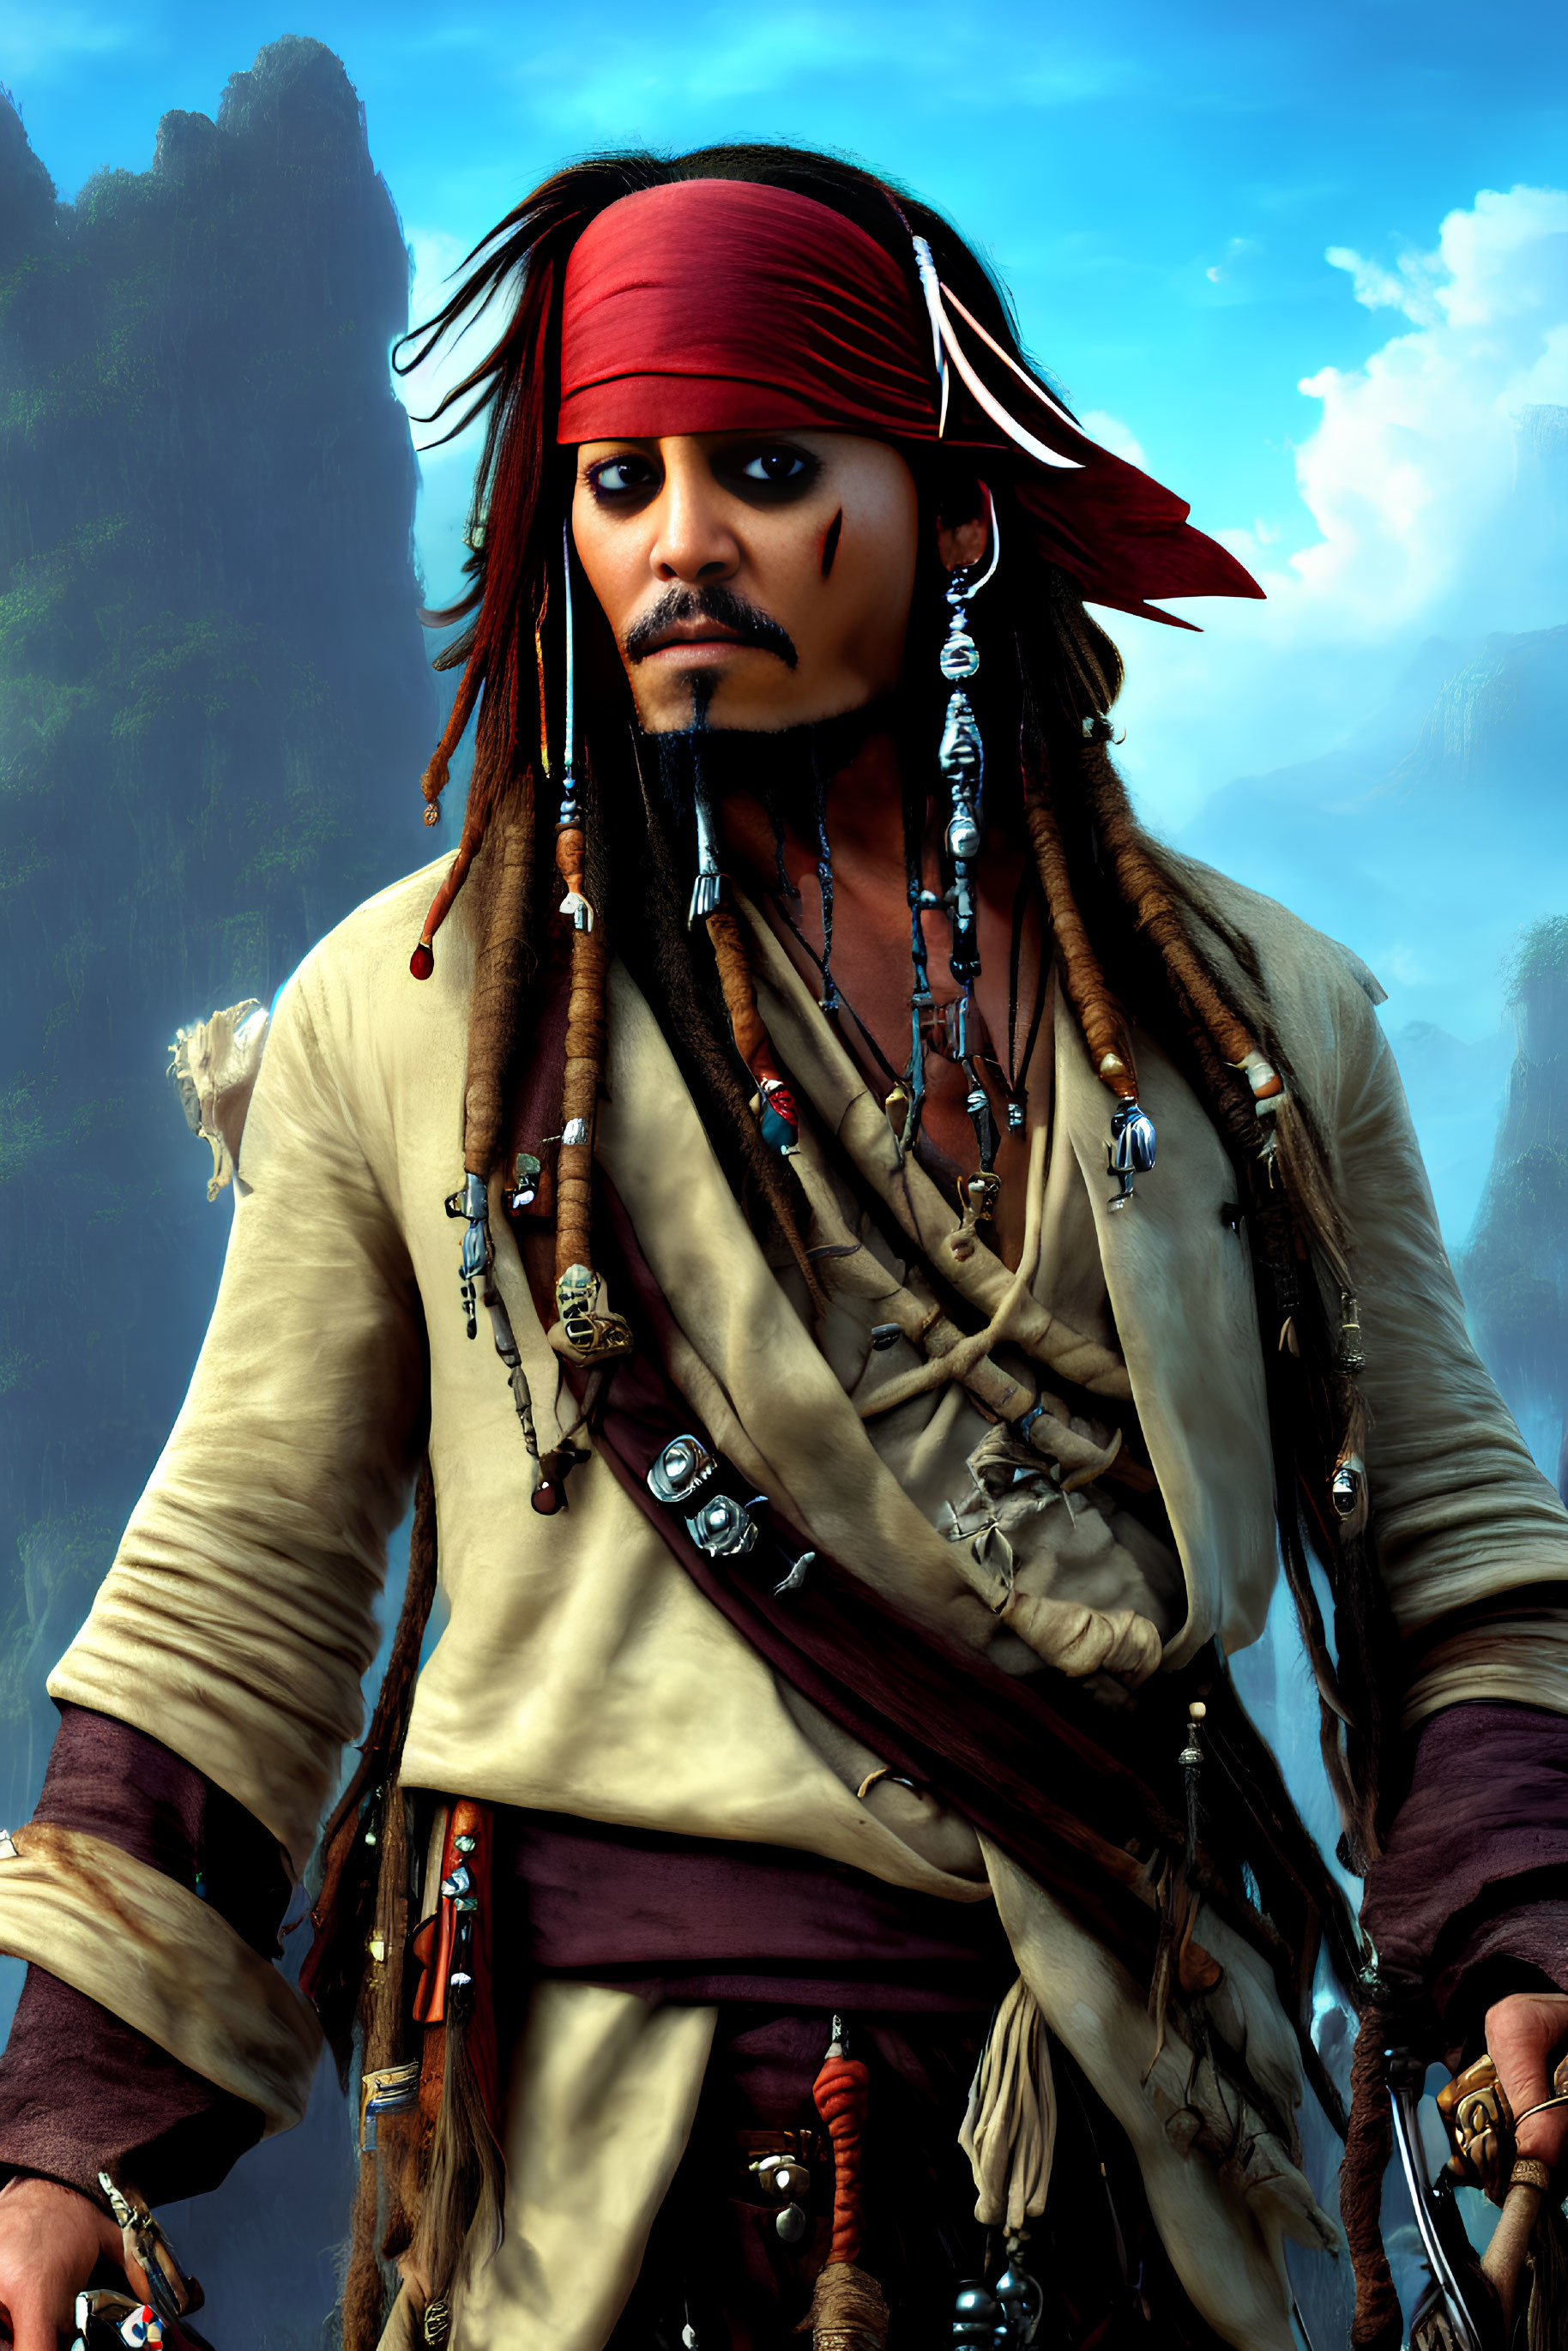 Person in pirate costume with red headband, braids, and beads against blue sky.